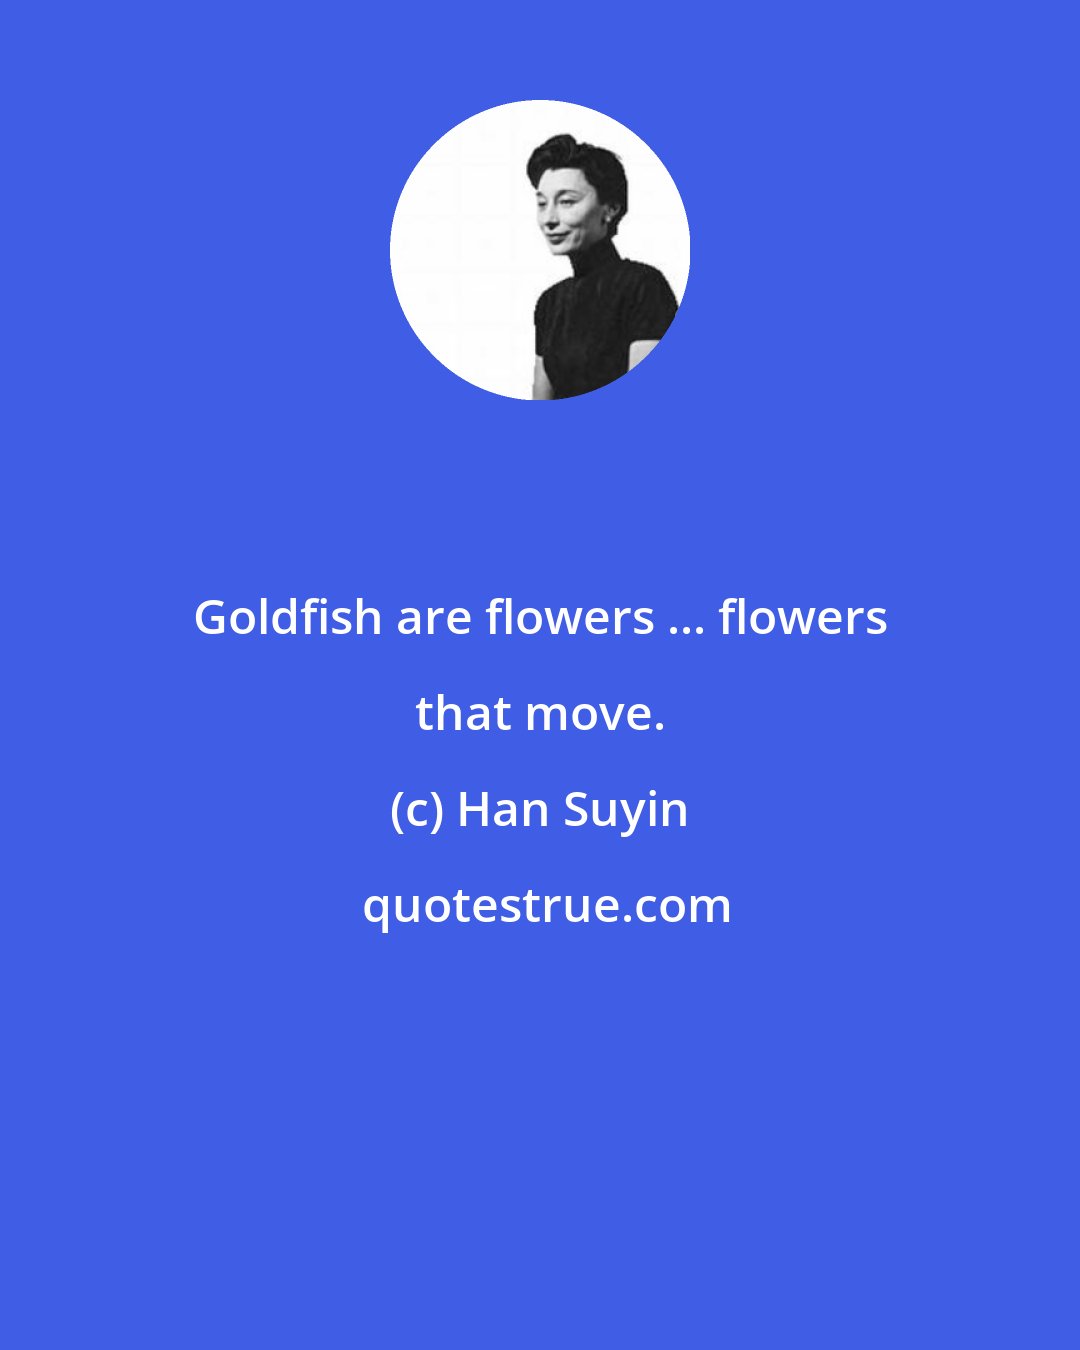 Han Suyin: Goldfish are flowers ... flowers that move.